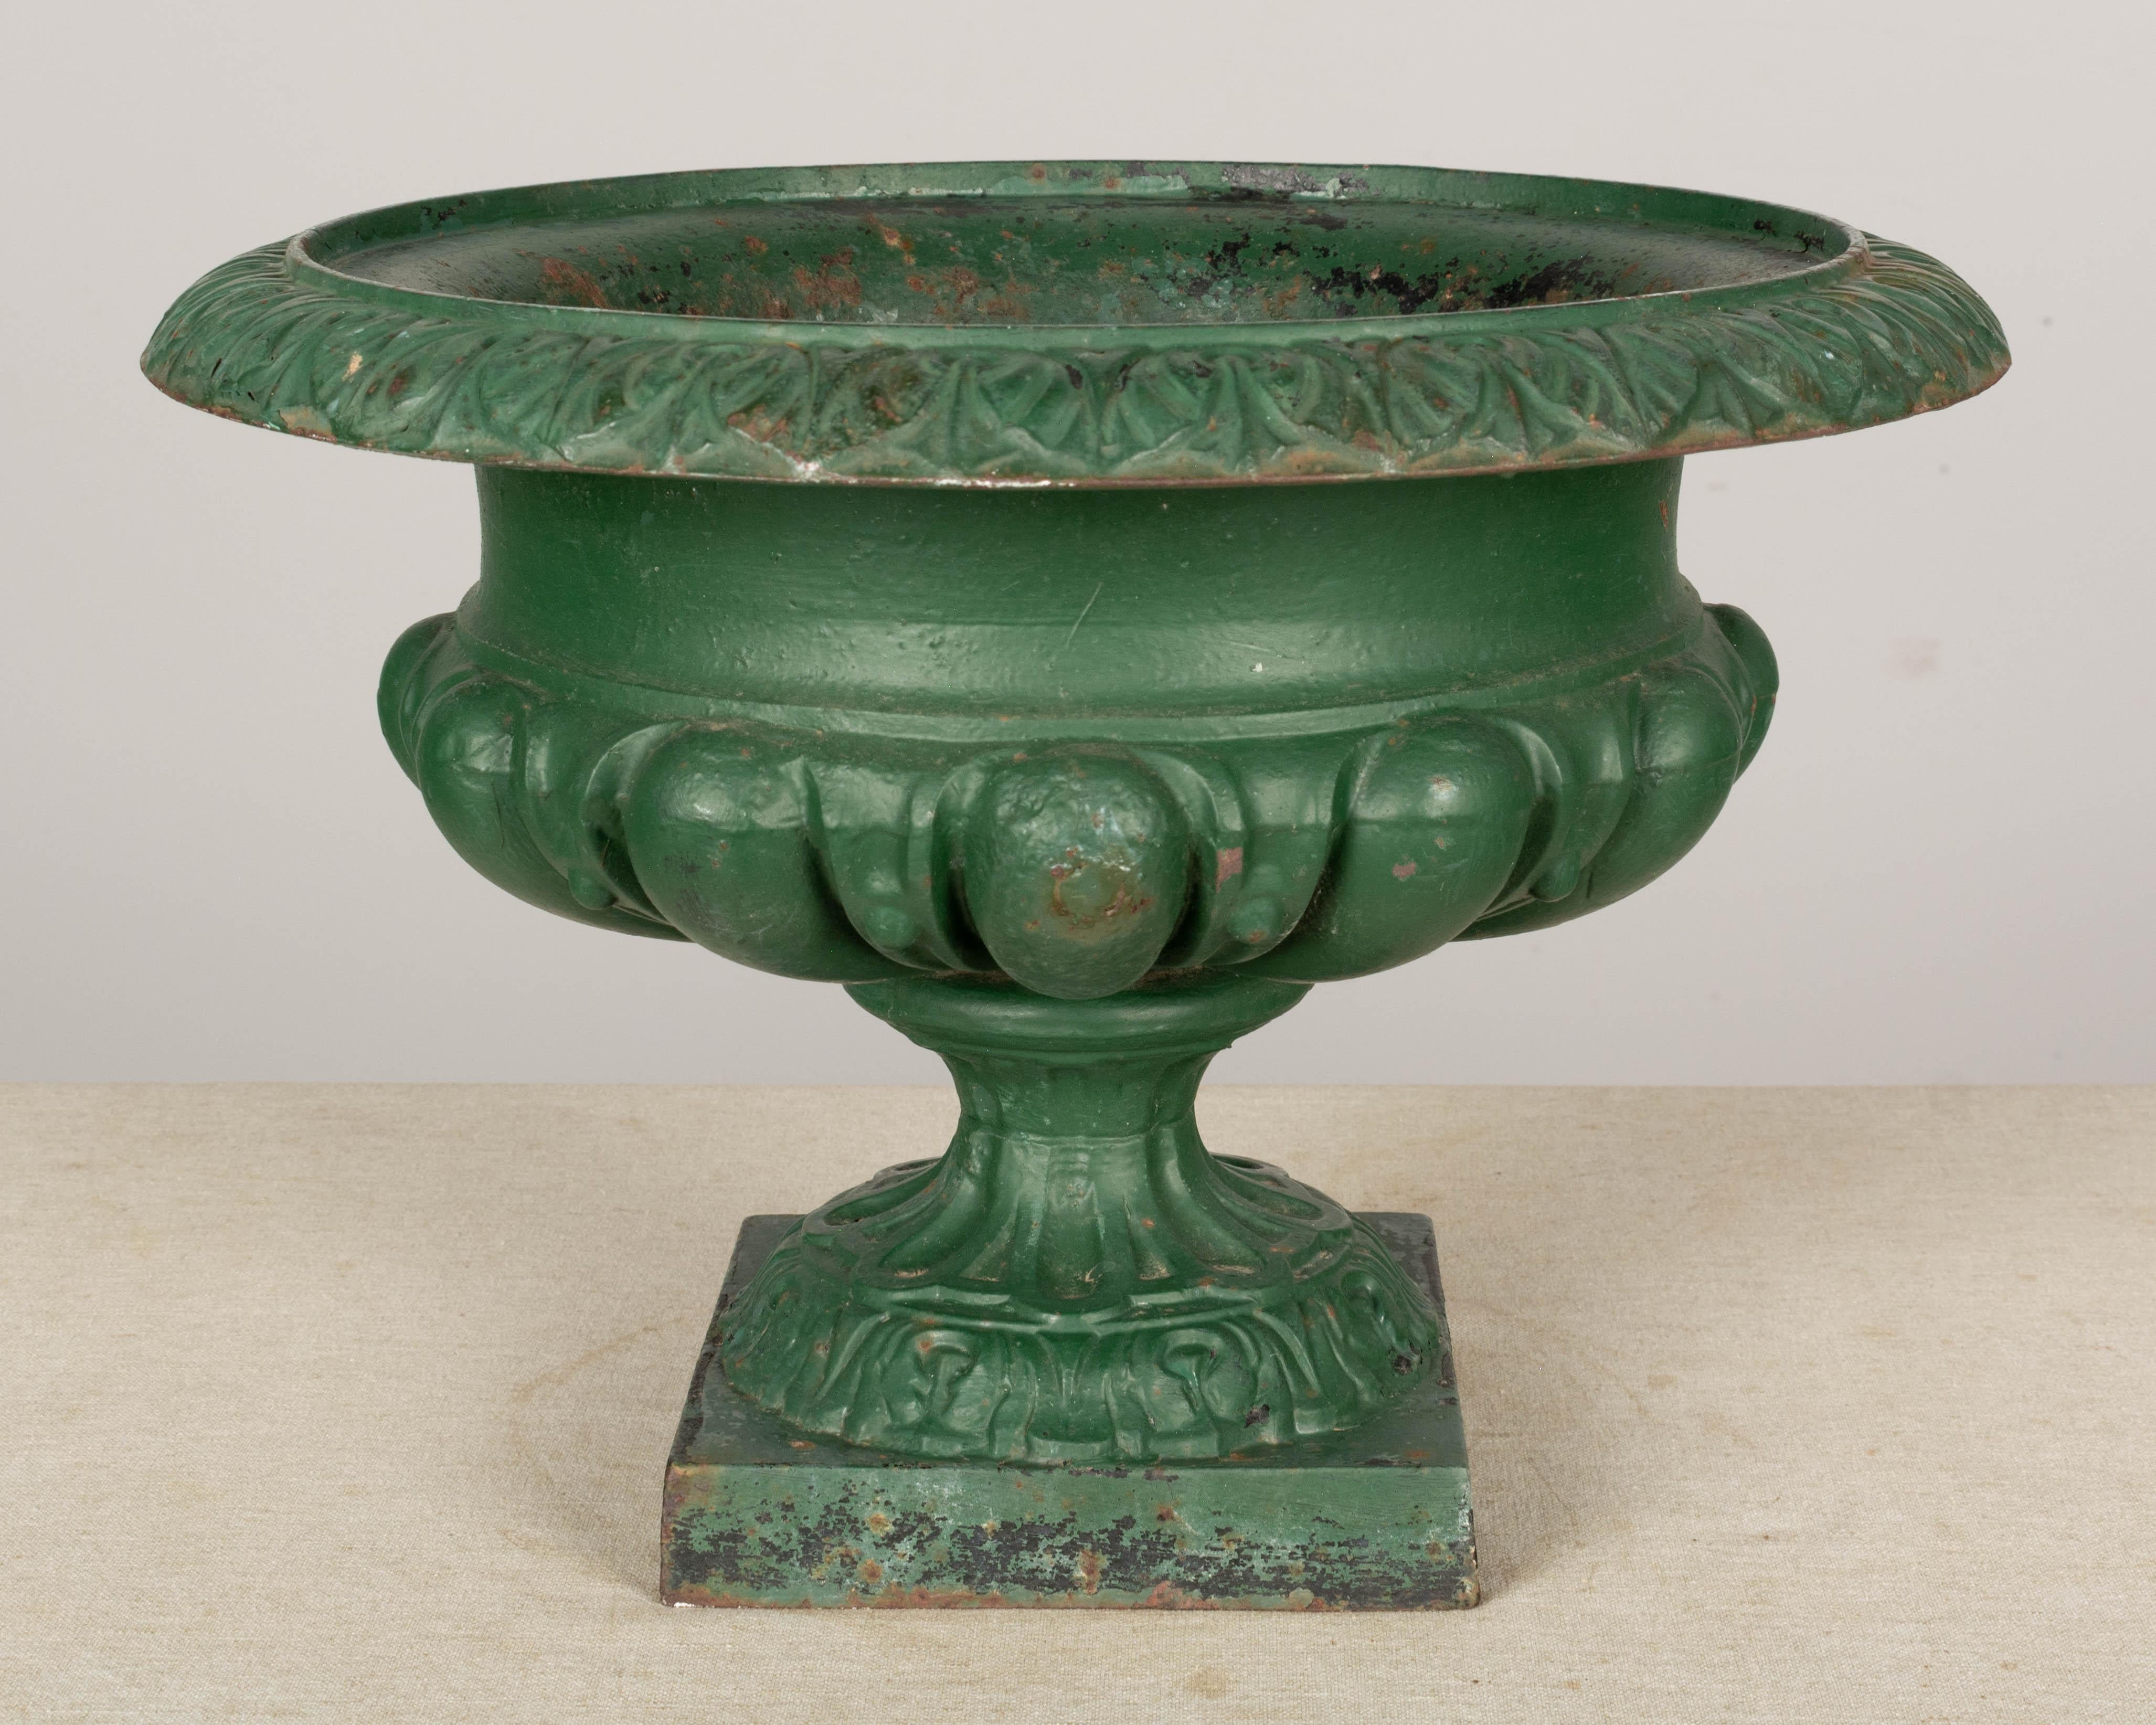 A 19th century French cast iron garden urn planter with pedestal base and green patina. Good condition with minor paint loss and some rust. 
Overall dimensions: 10.5 height x 16